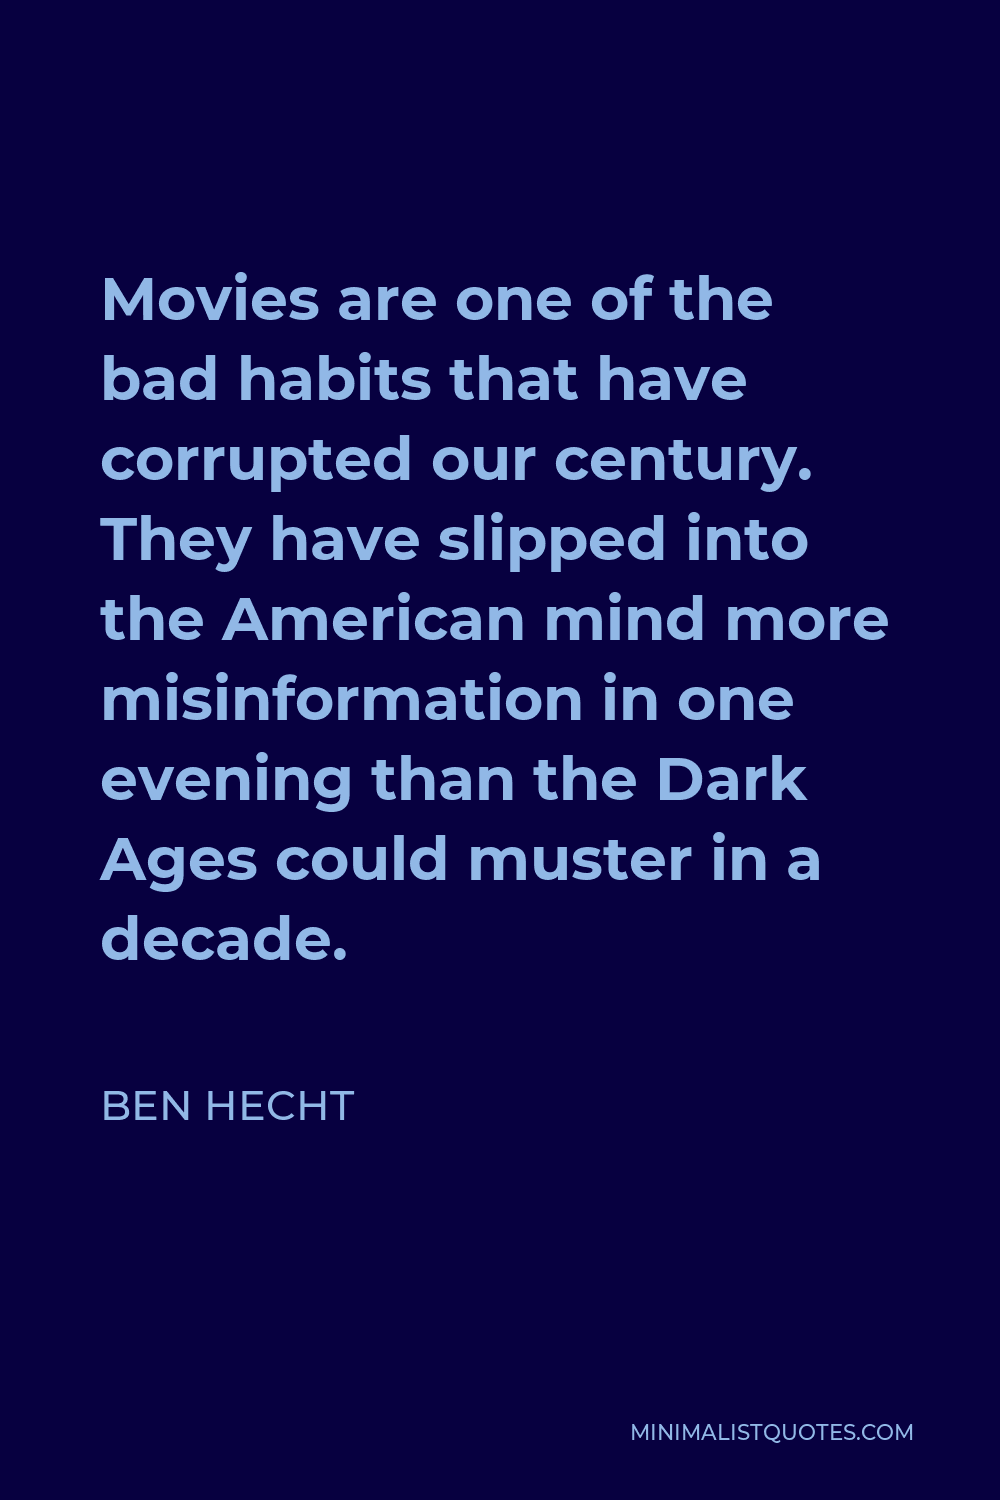 Ben Hecht Quote - Movies are one of the bad habits that have corrupted our century. They have slipped into the American mind more misinformation in one evening than the Dark Ages could muster in a decade.